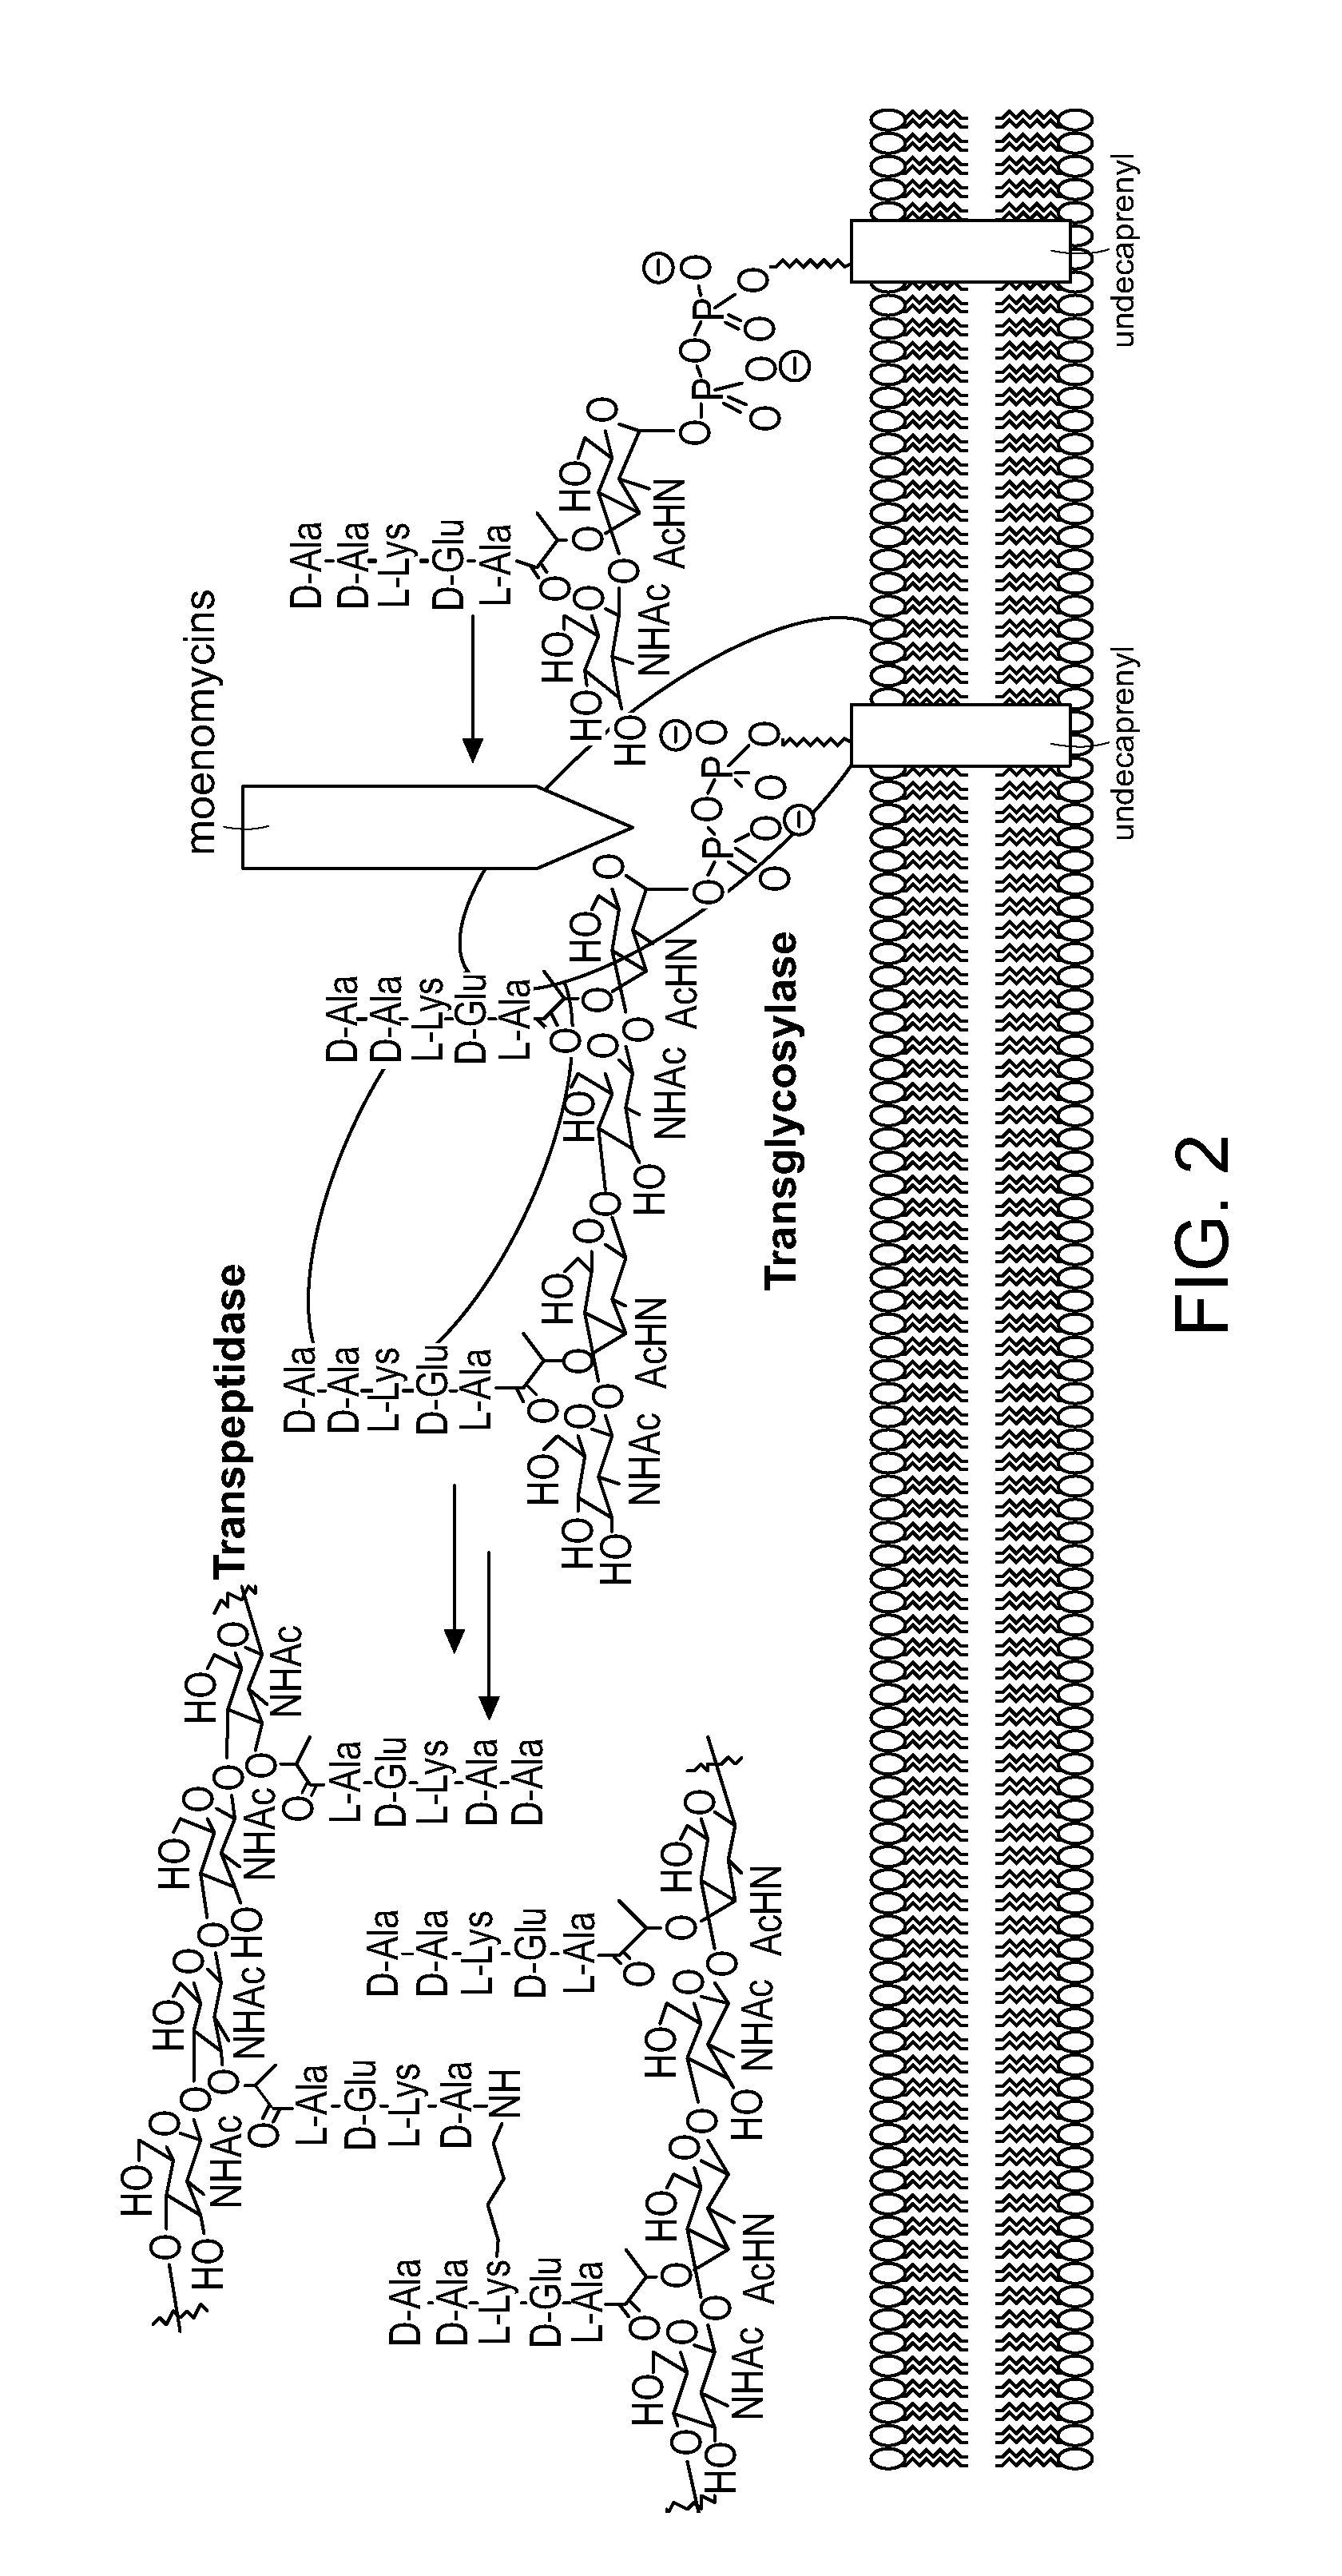 Moenomycin analogs, methods of synthesis, and uses thereof